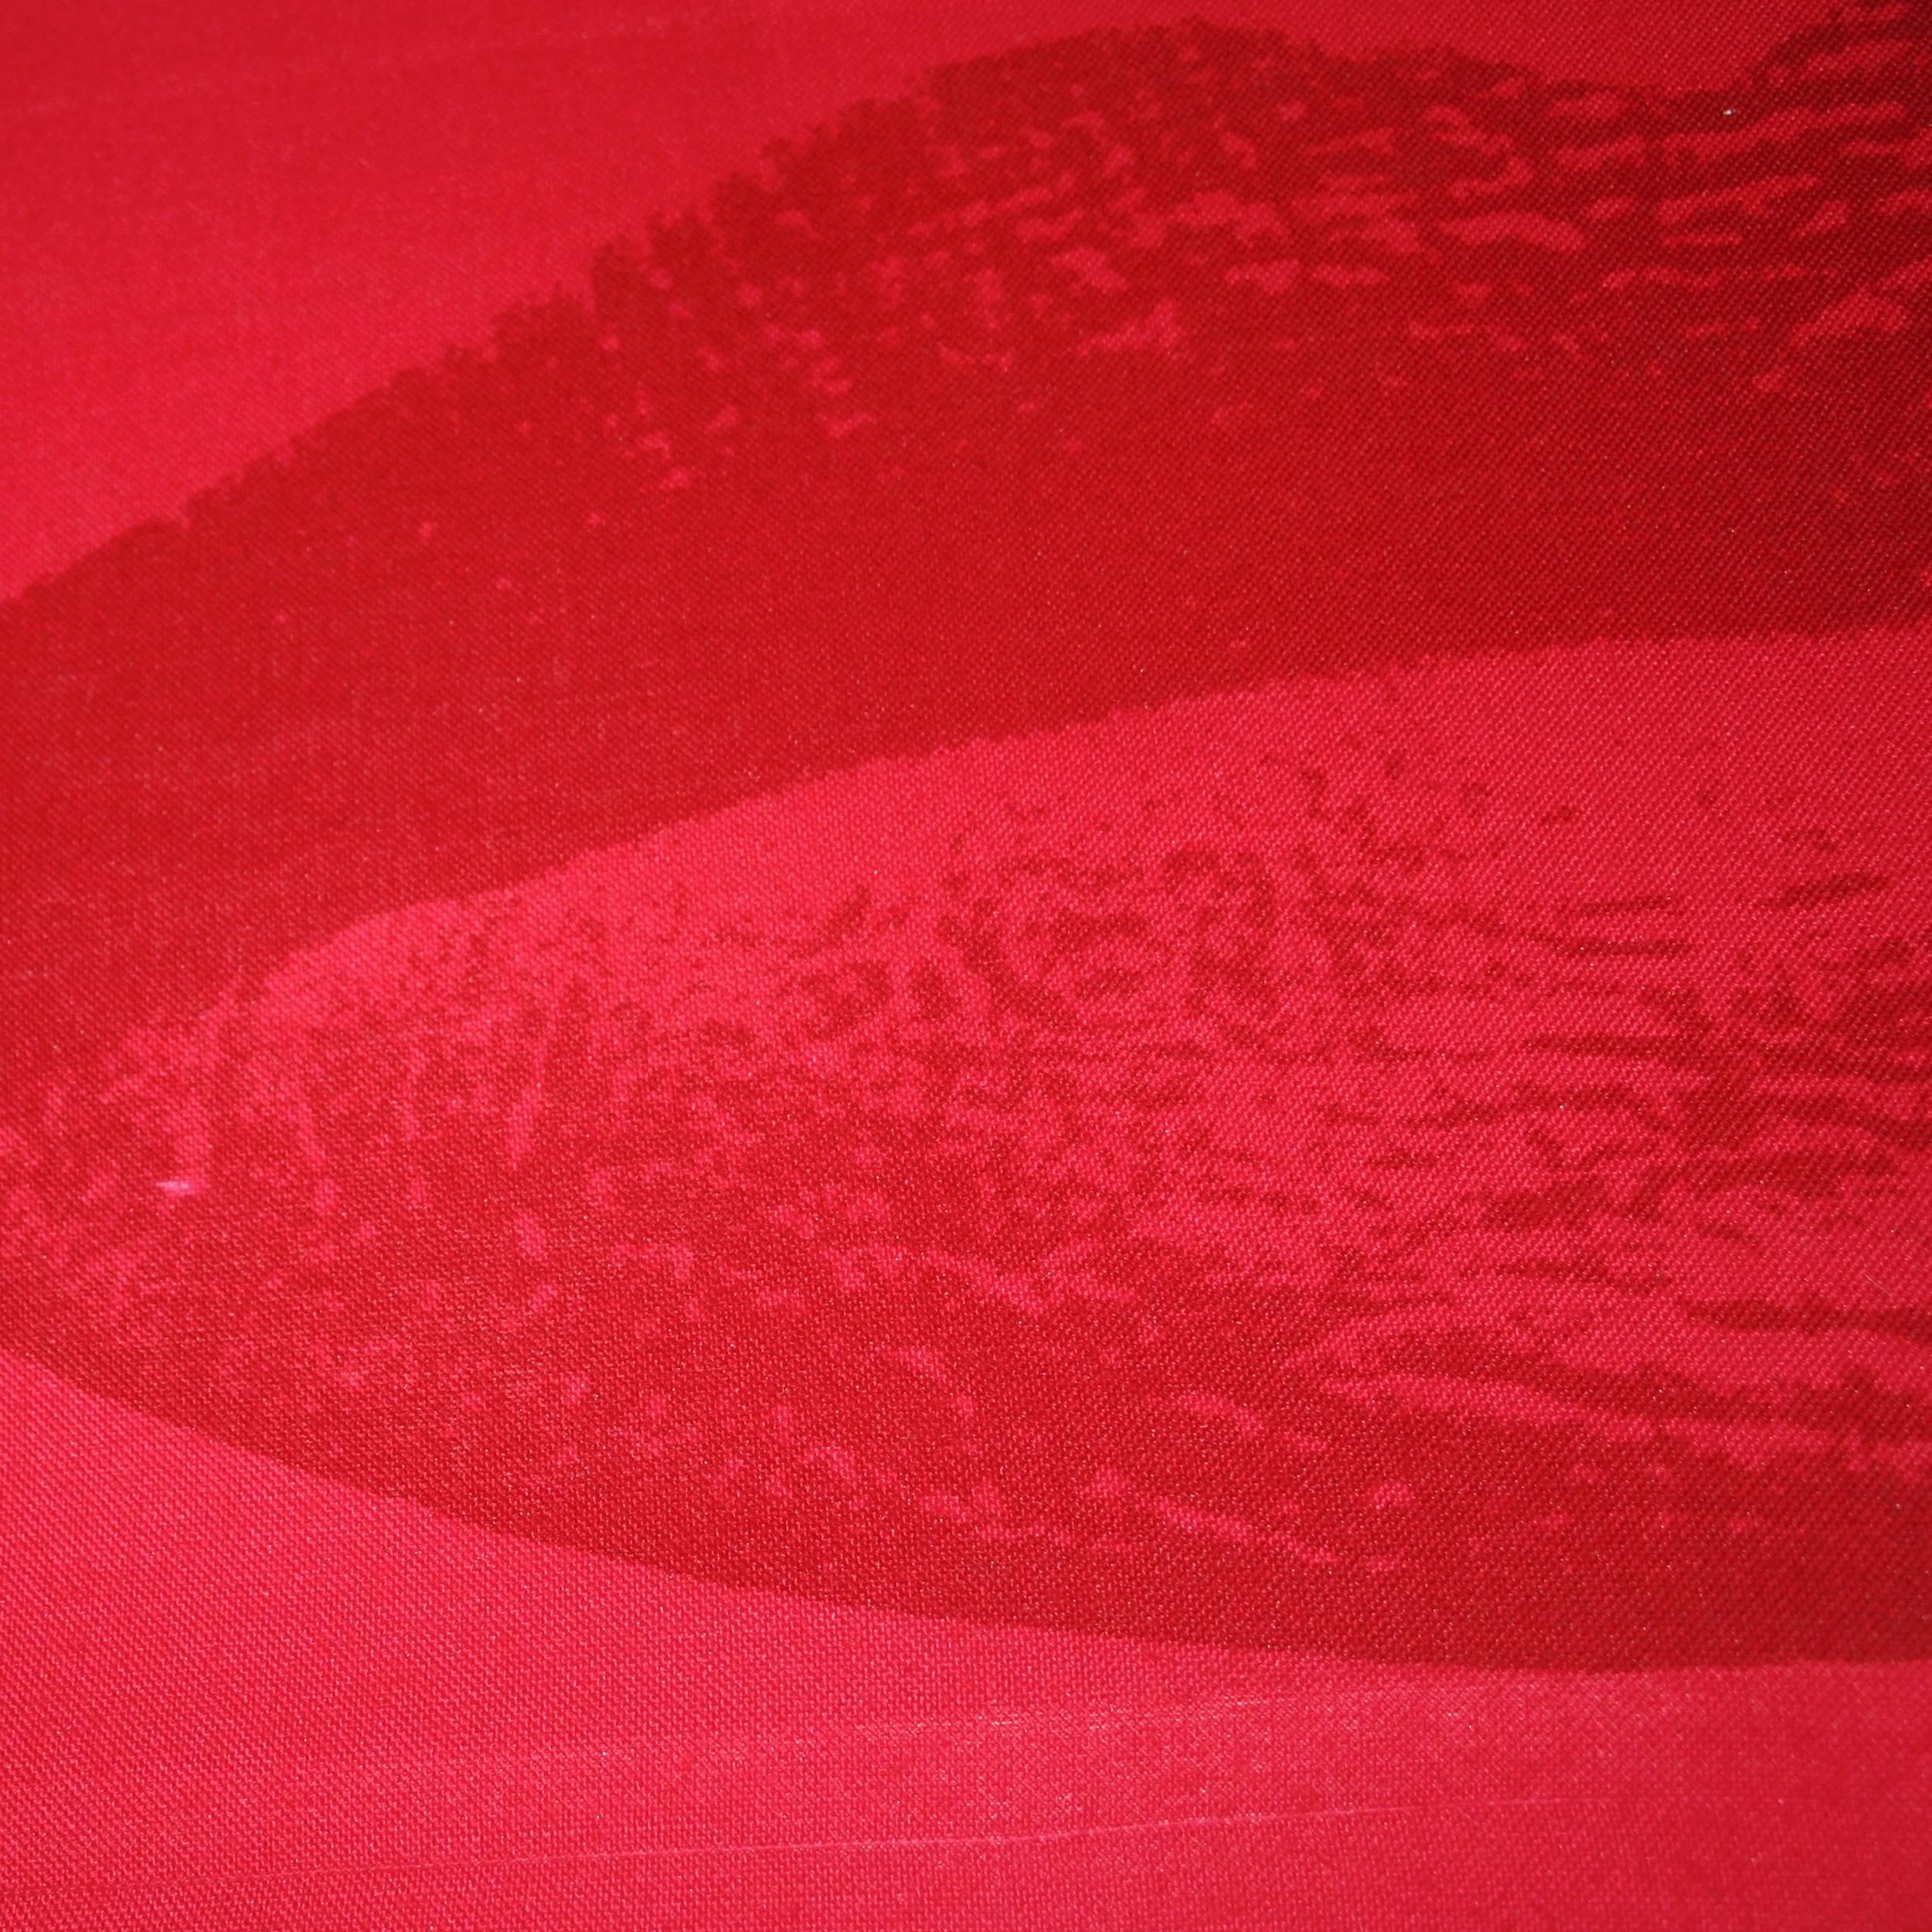 'Design Lips' is a fabric wall panel designed and produced in 1968 as part of Verner Panton's 'Anatomical Designs Collection', which were photorealistic illustrations of body parts displayed on various color backgrounds. 
This example is part of